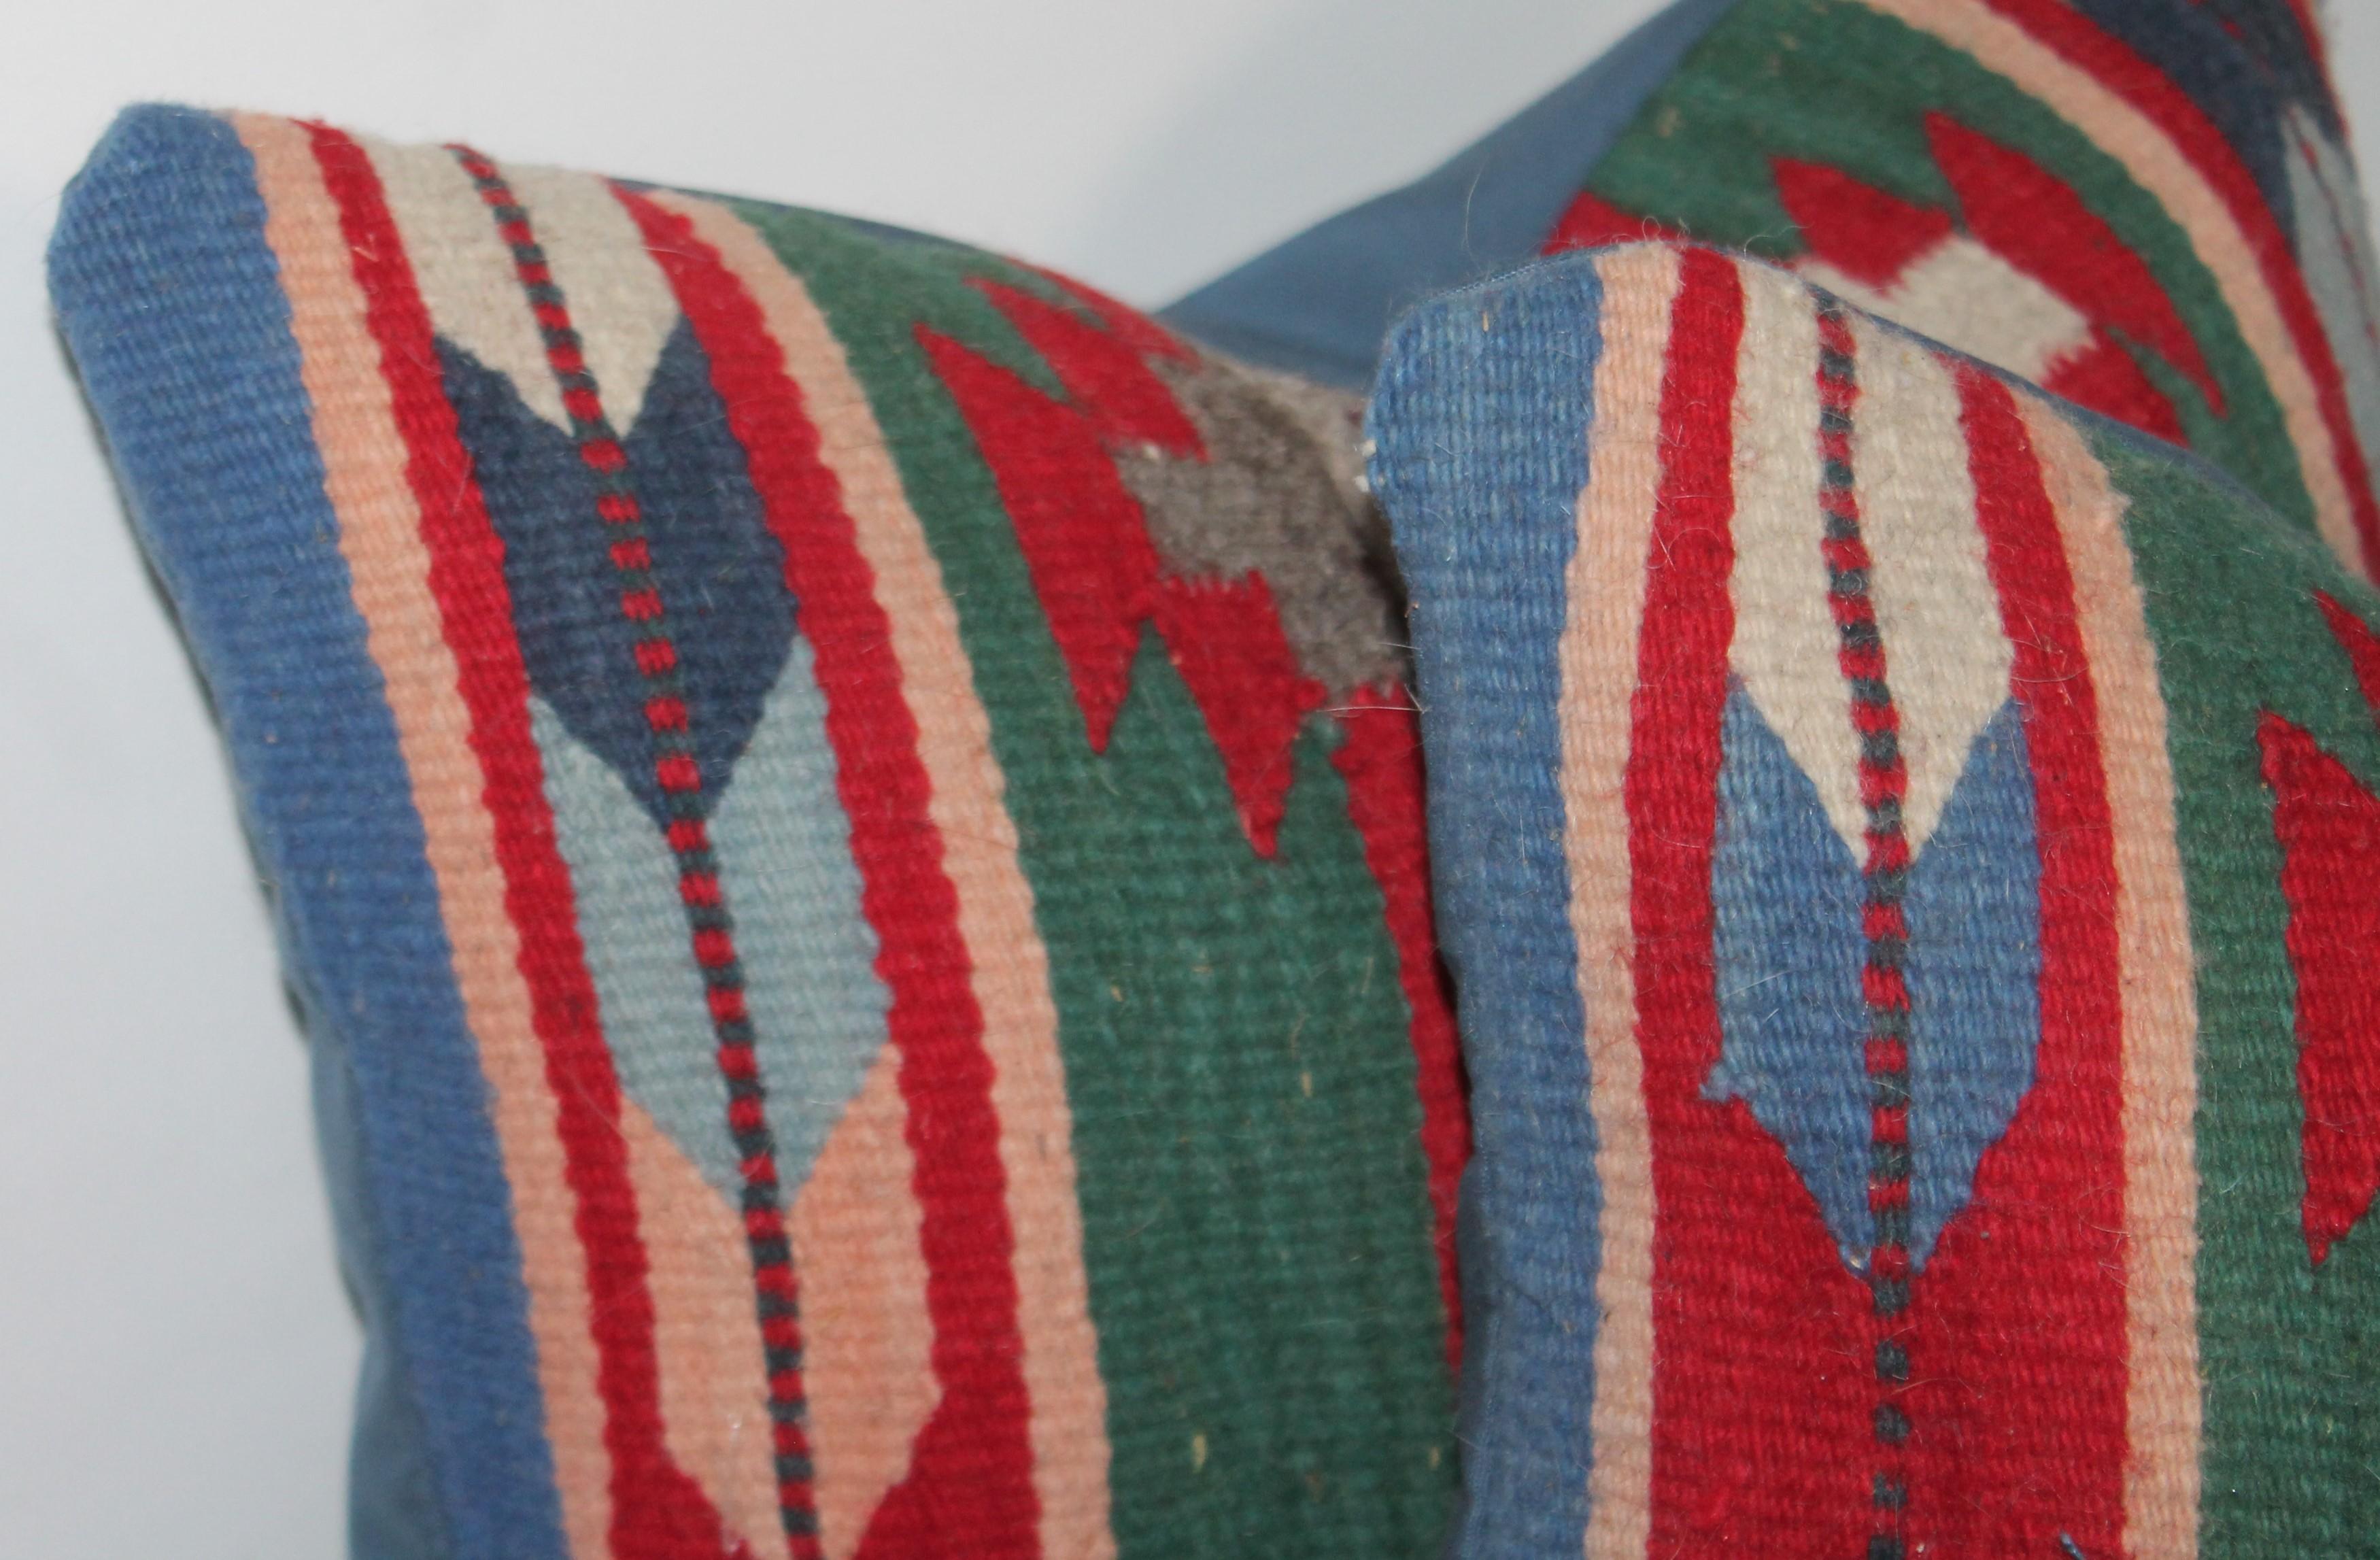 Adirondack Collection of Mexican or American Indian Weaving Pillows, Two Pairs